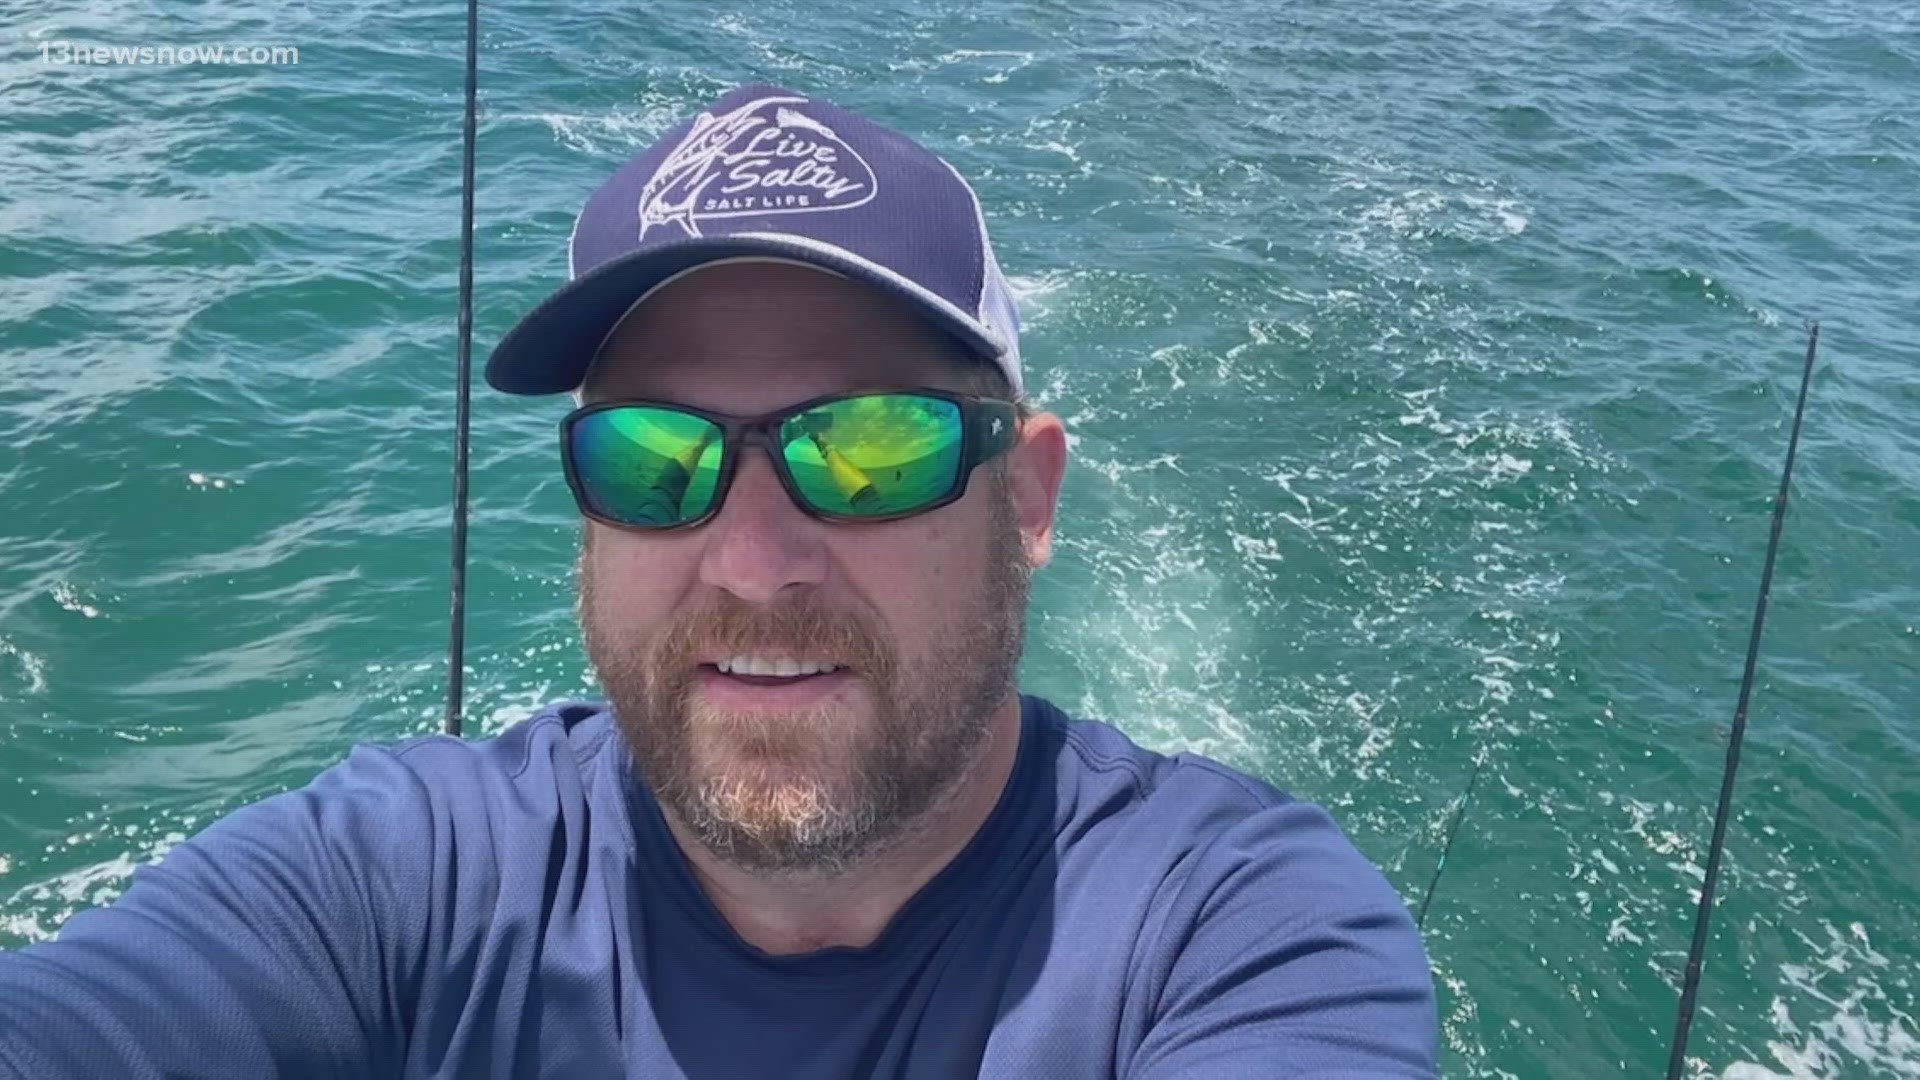 Police found 47-year-old Scott Johnson's vehicle and boat ramp in Kill Devil Hills on Thursday. He was last seen by a neighbor on August 22.